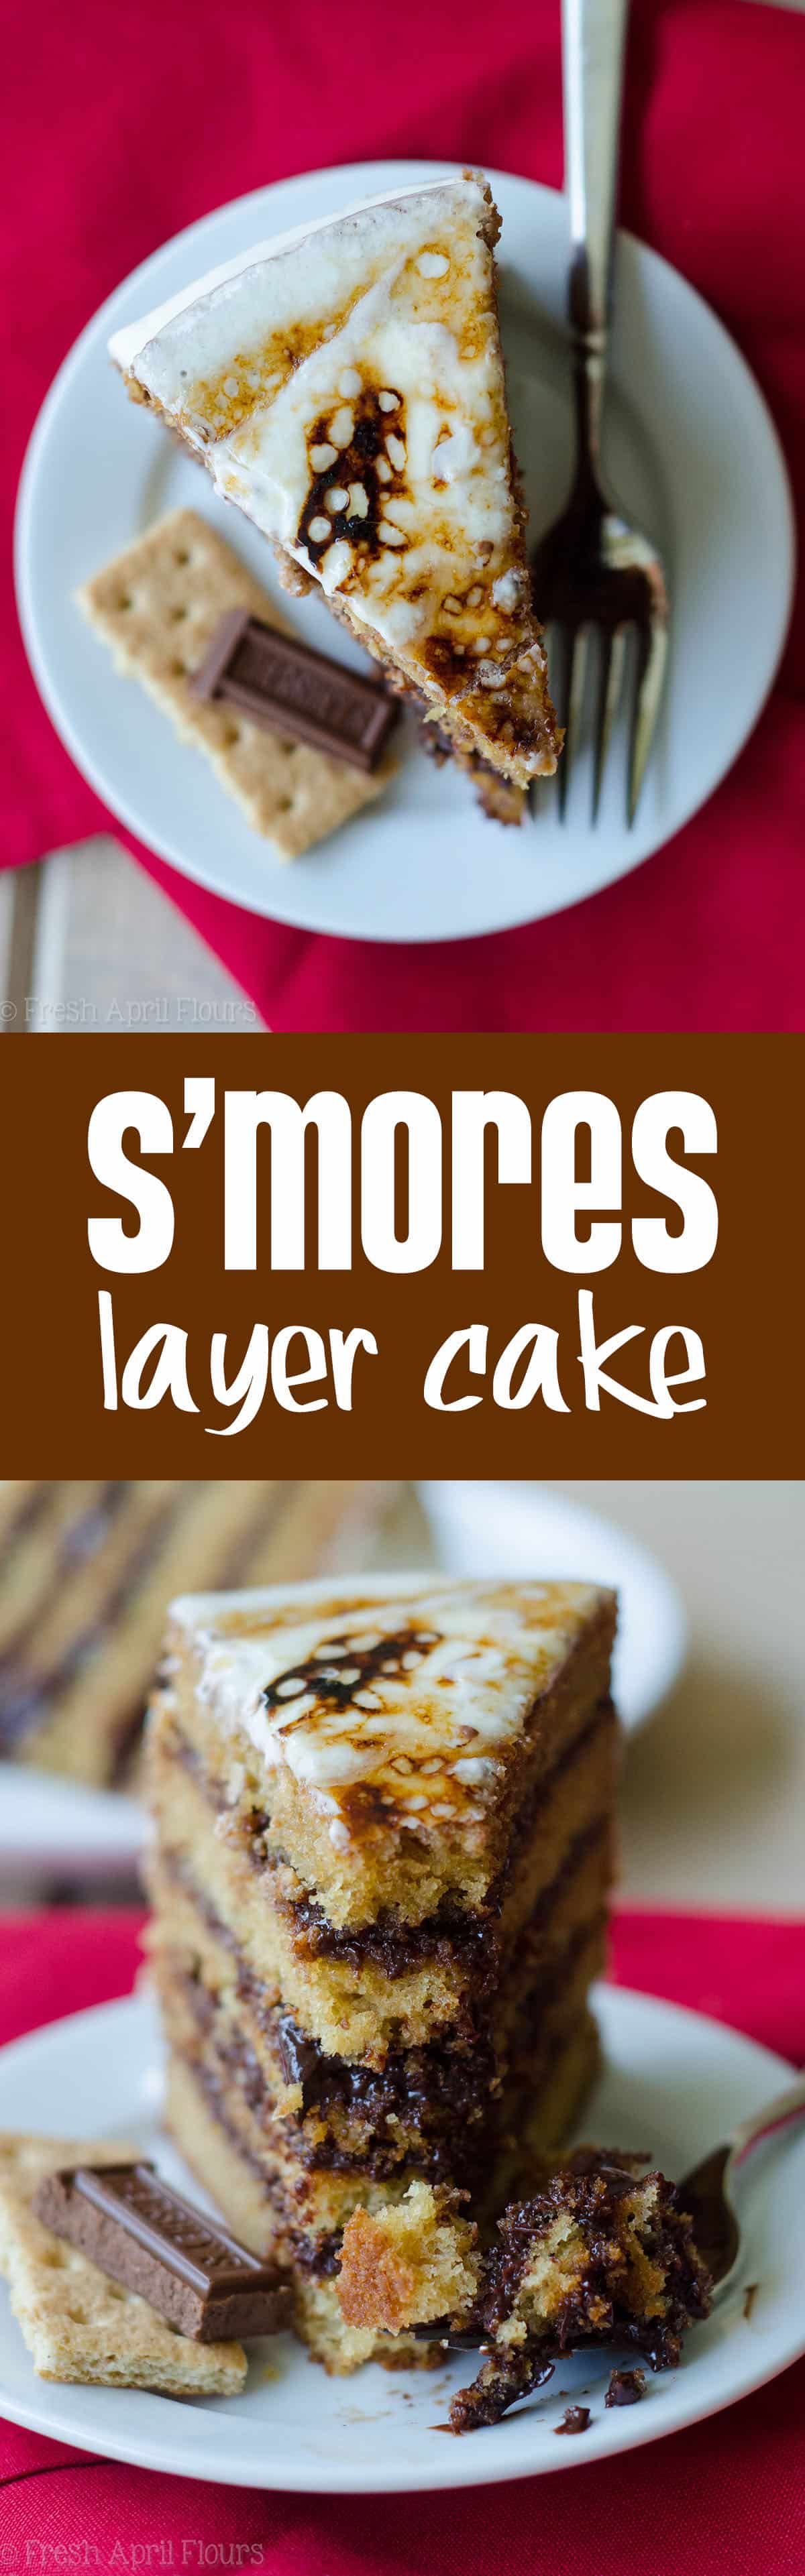 S'mores Layer Cake: Graham cracker cake layered with creamy chocolate ganache, covered in toasted marshmallow buttercream. via @frshaprilflours